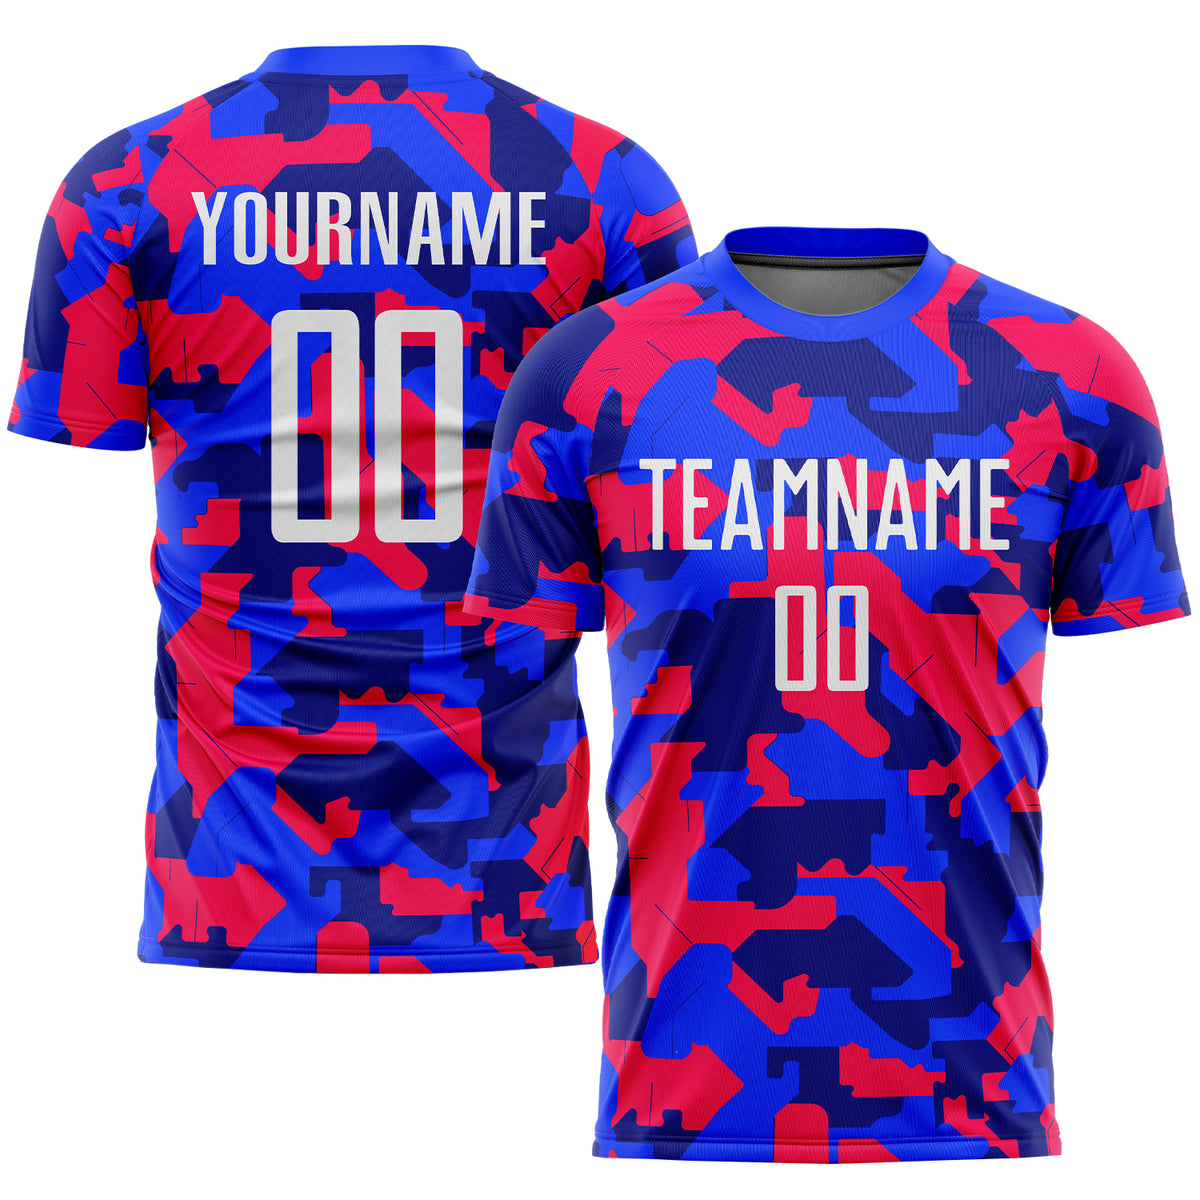  Las Vegas Custom Football Shirt Personalize Your Name, Number  And Team Name. : Handmade Products